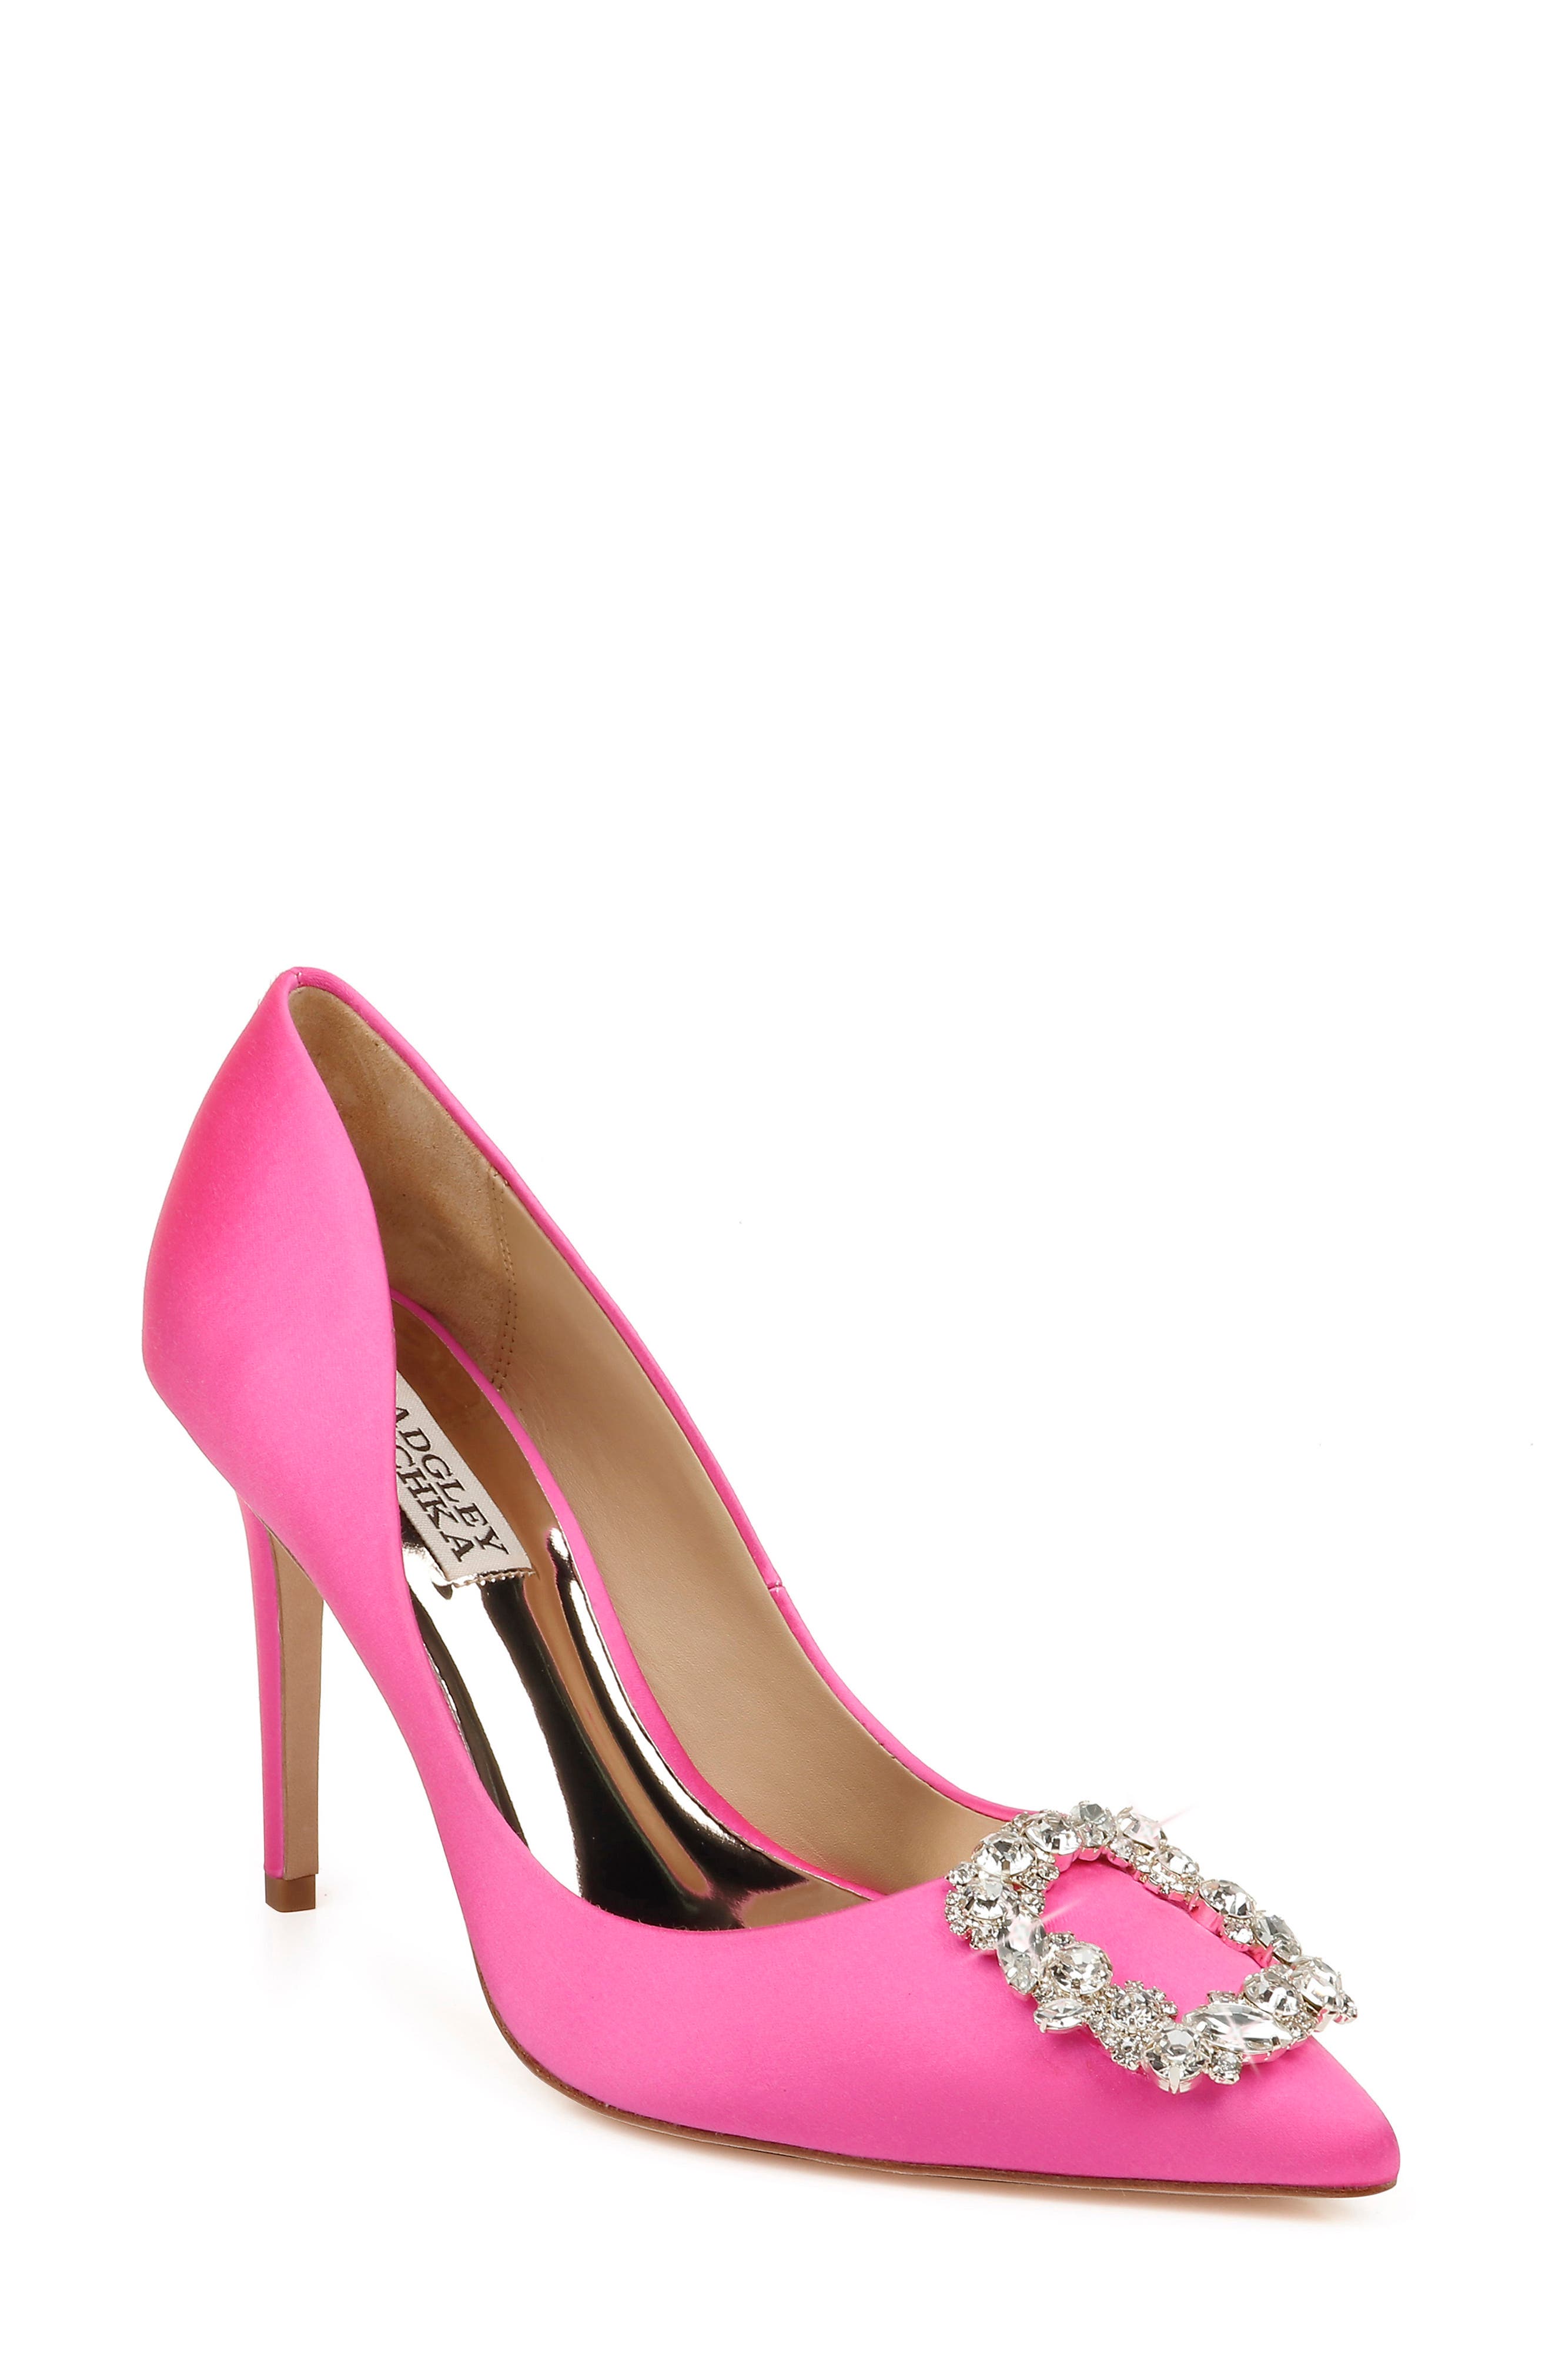 Badgley Mischka Collection Cher Crystal Embellished Pump in Hot Pink Satin